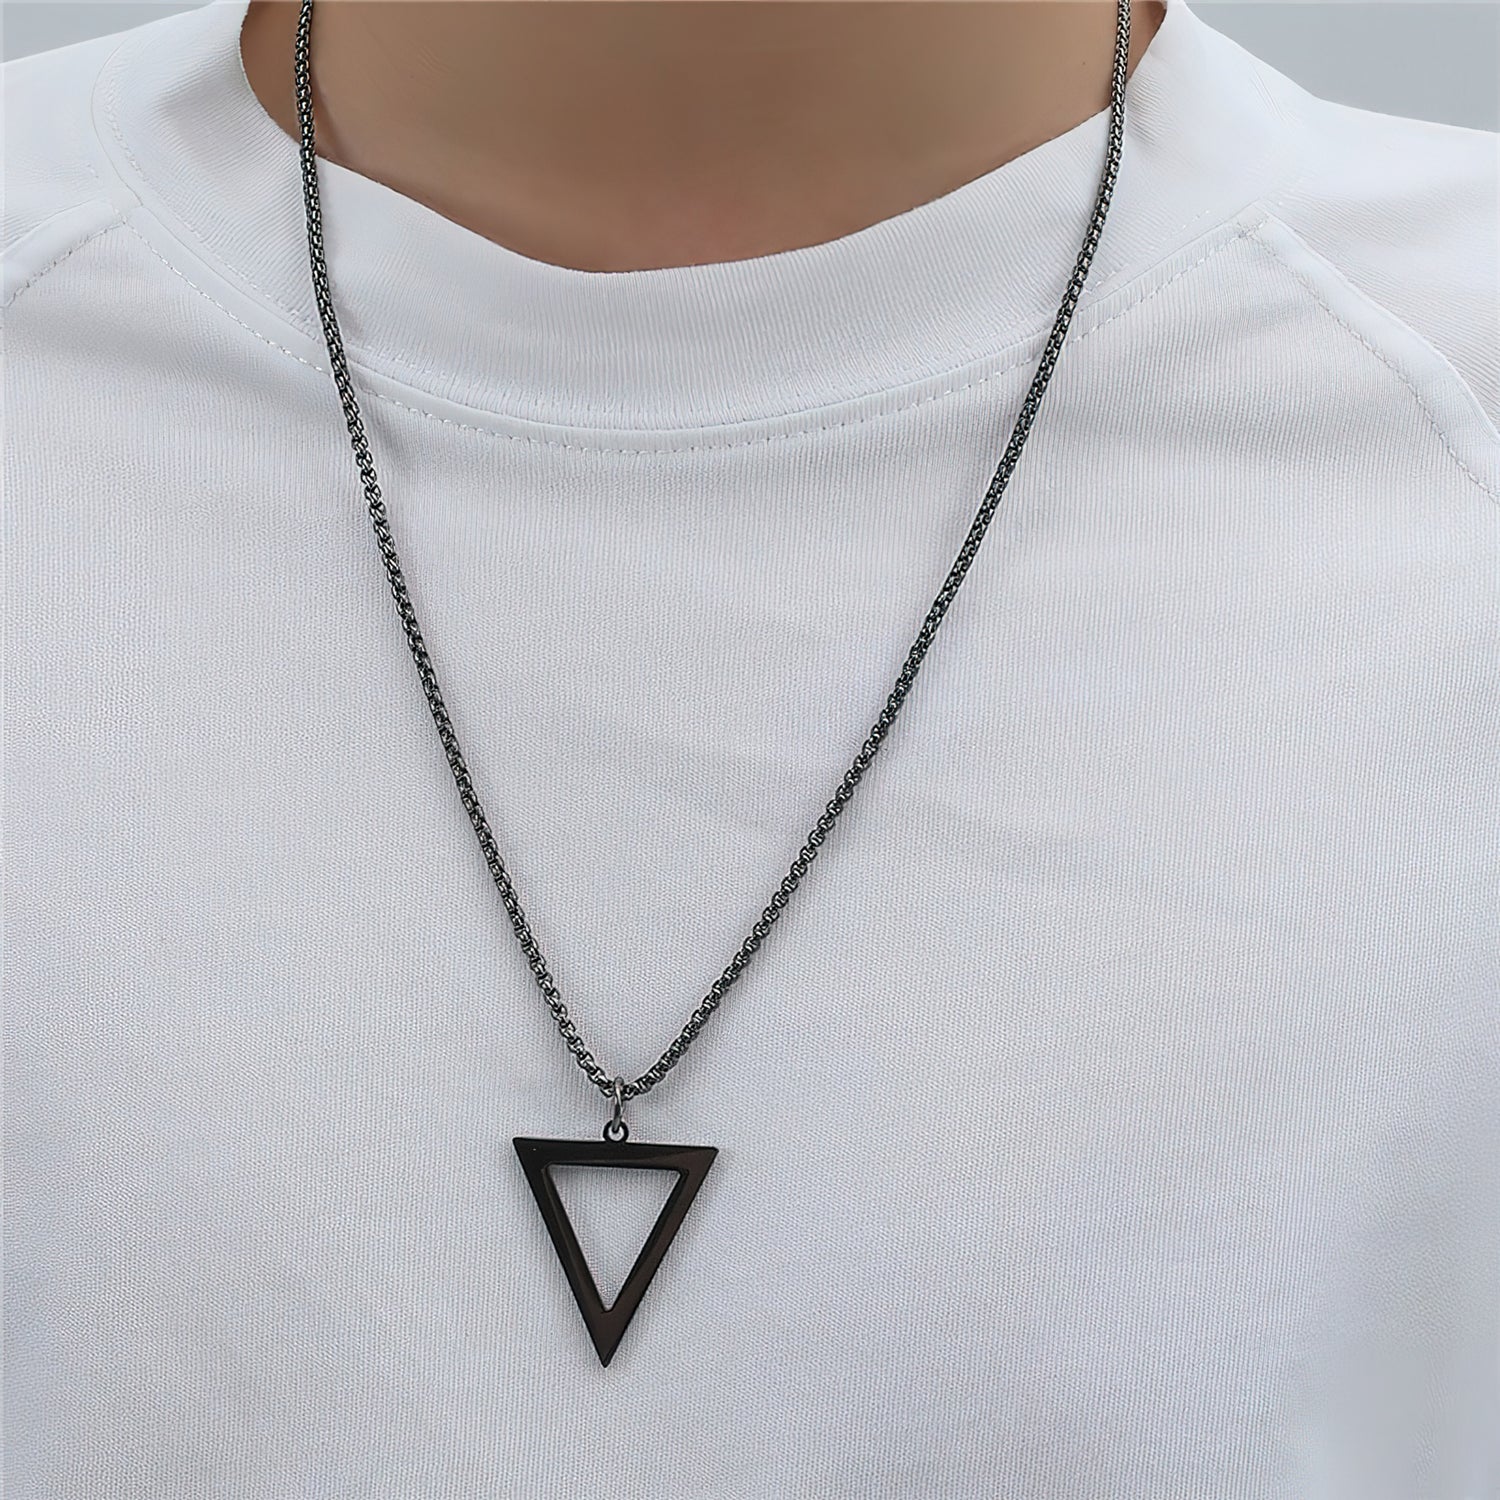 Triangle Pendant Necklace For Men